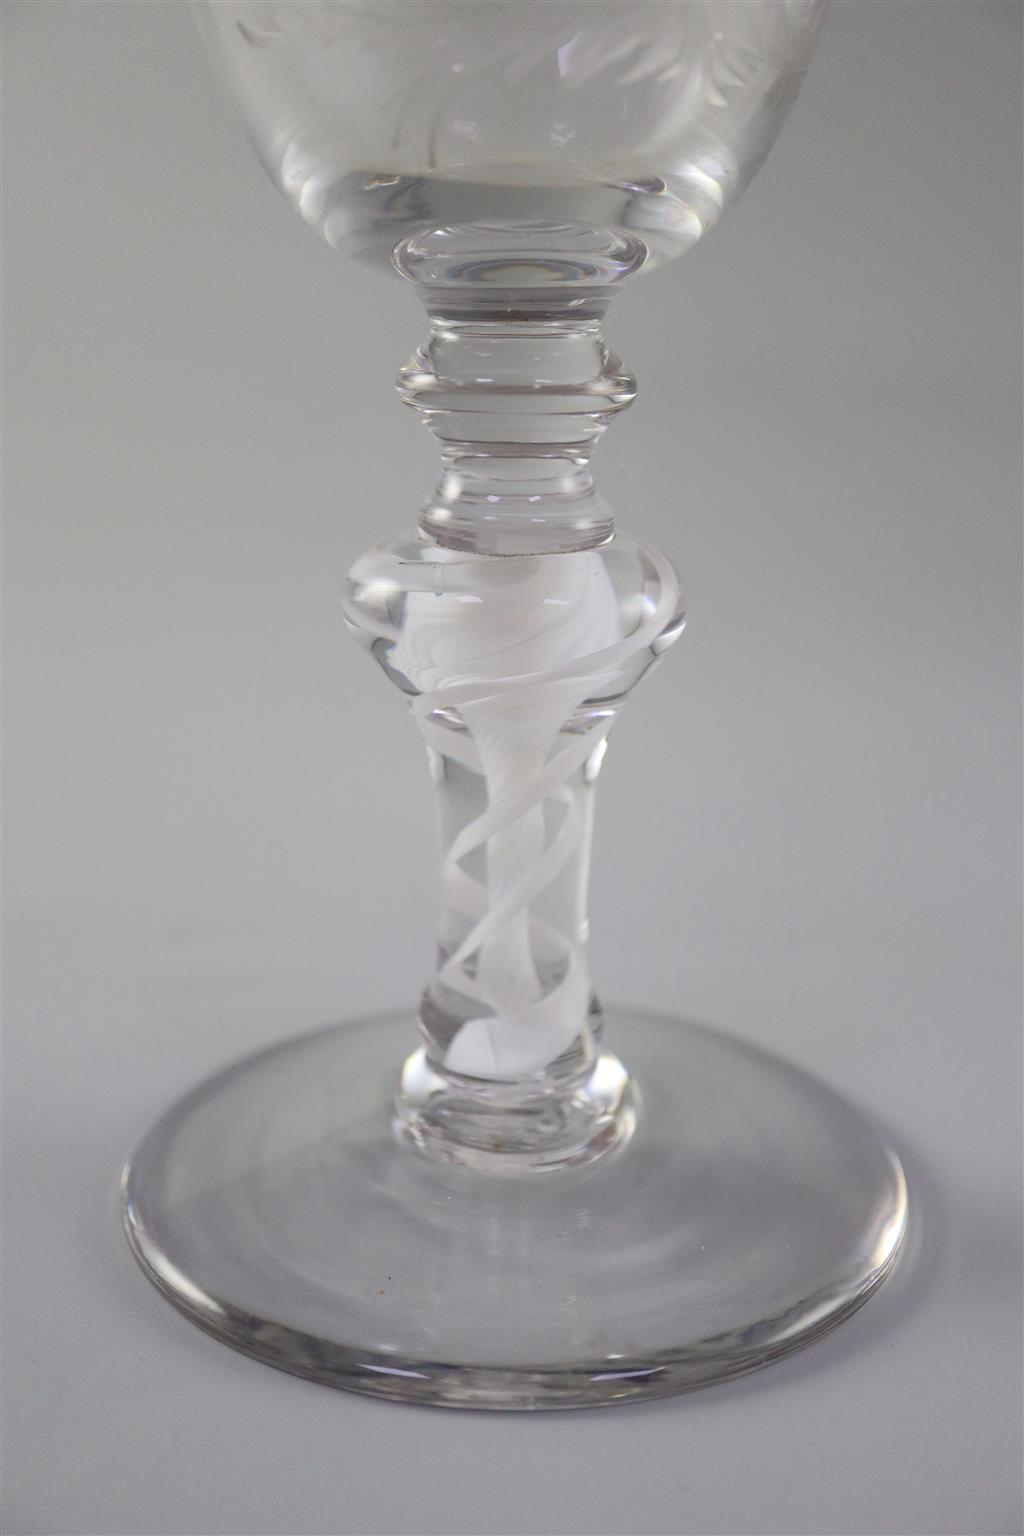 A cotton stem goblet, English or Dutch, c.1765-70, with Beilby design engraving, 19.5cm high